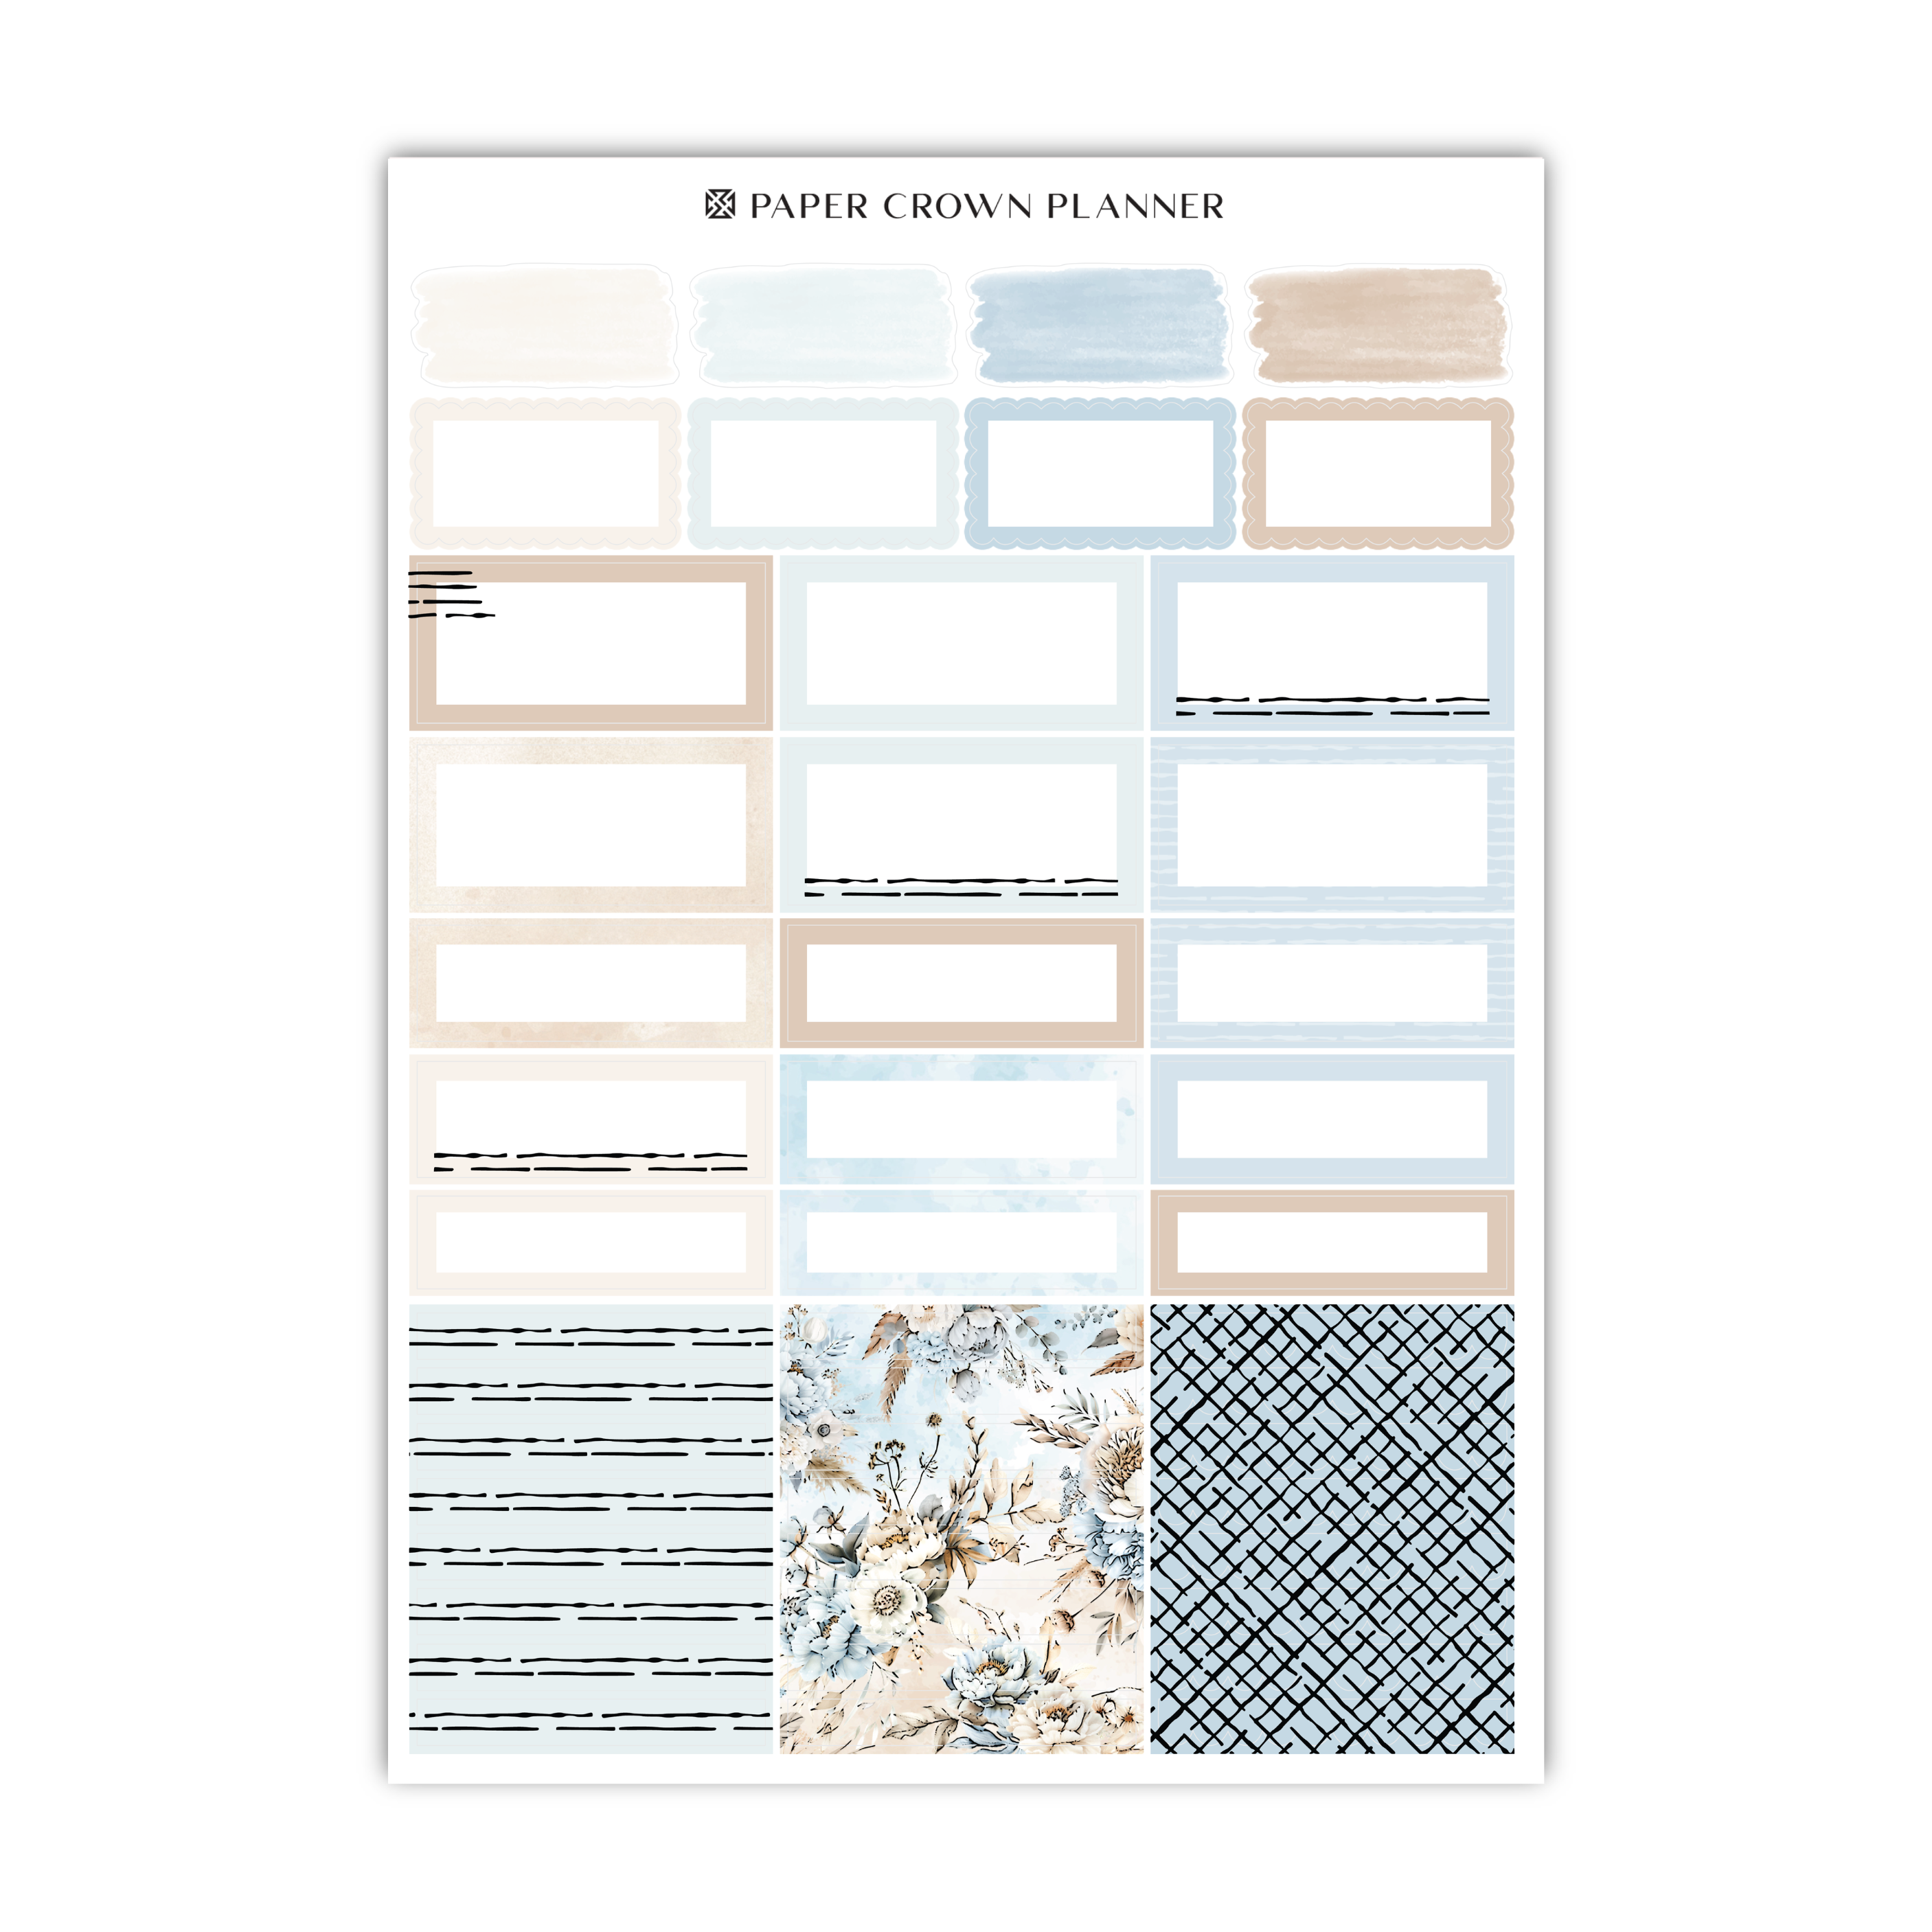 the paper crown planner is a blue and beige planner